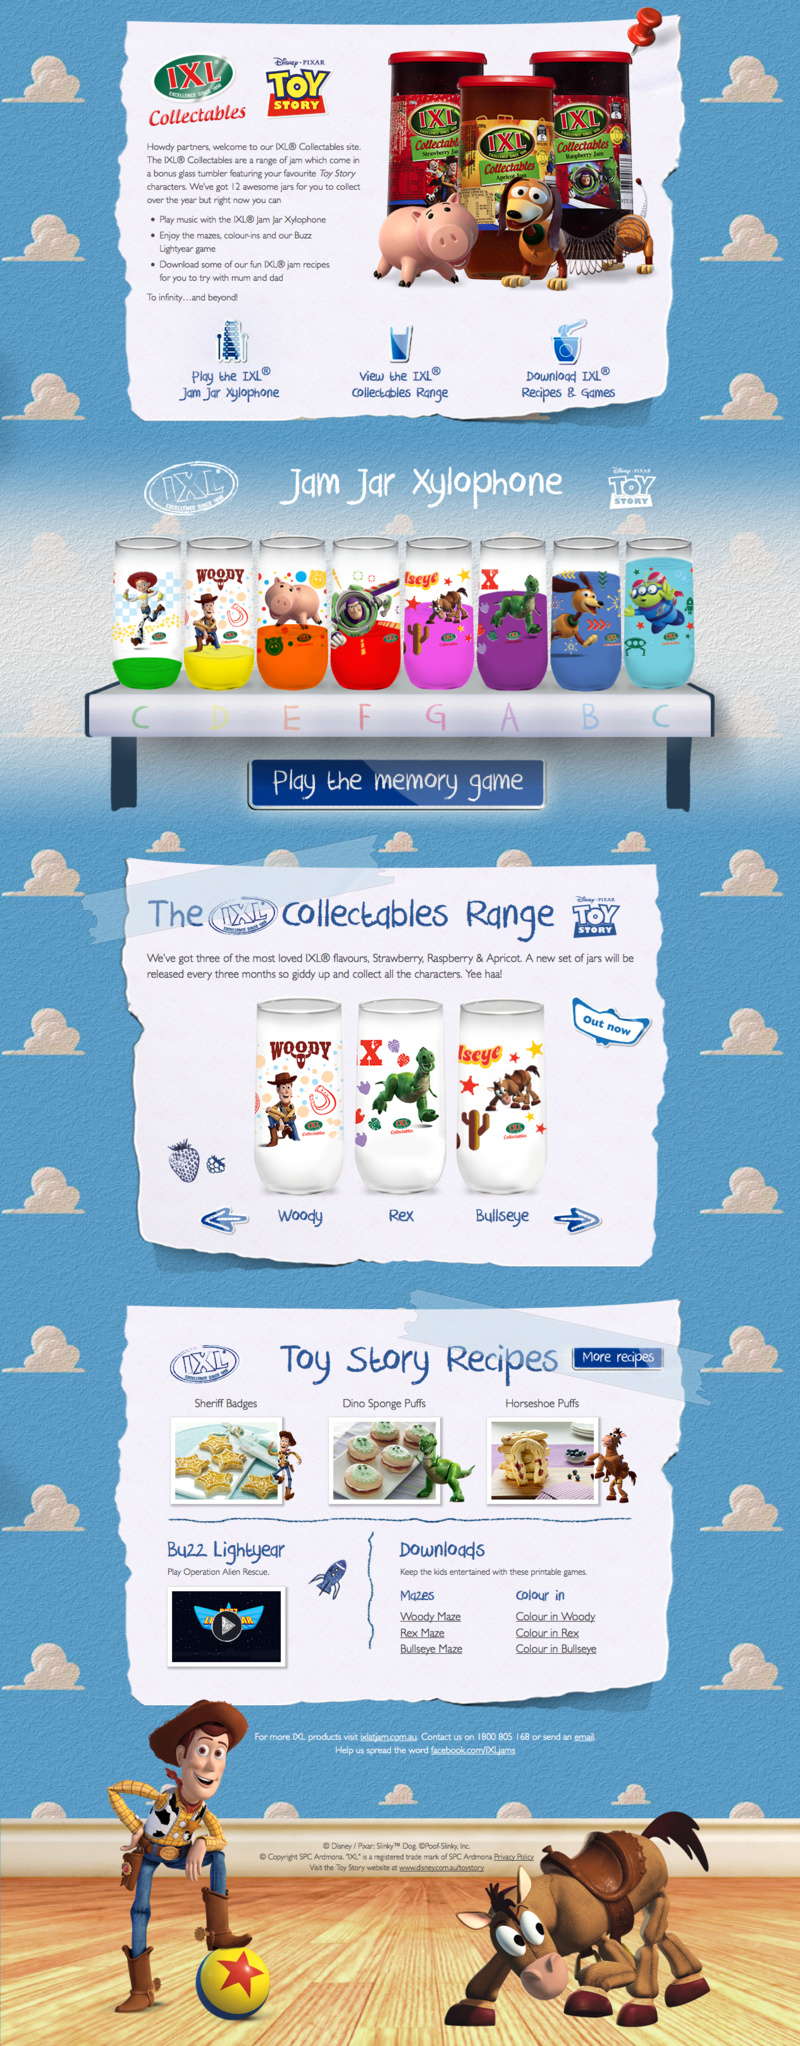 IXL Collectables Toy Story